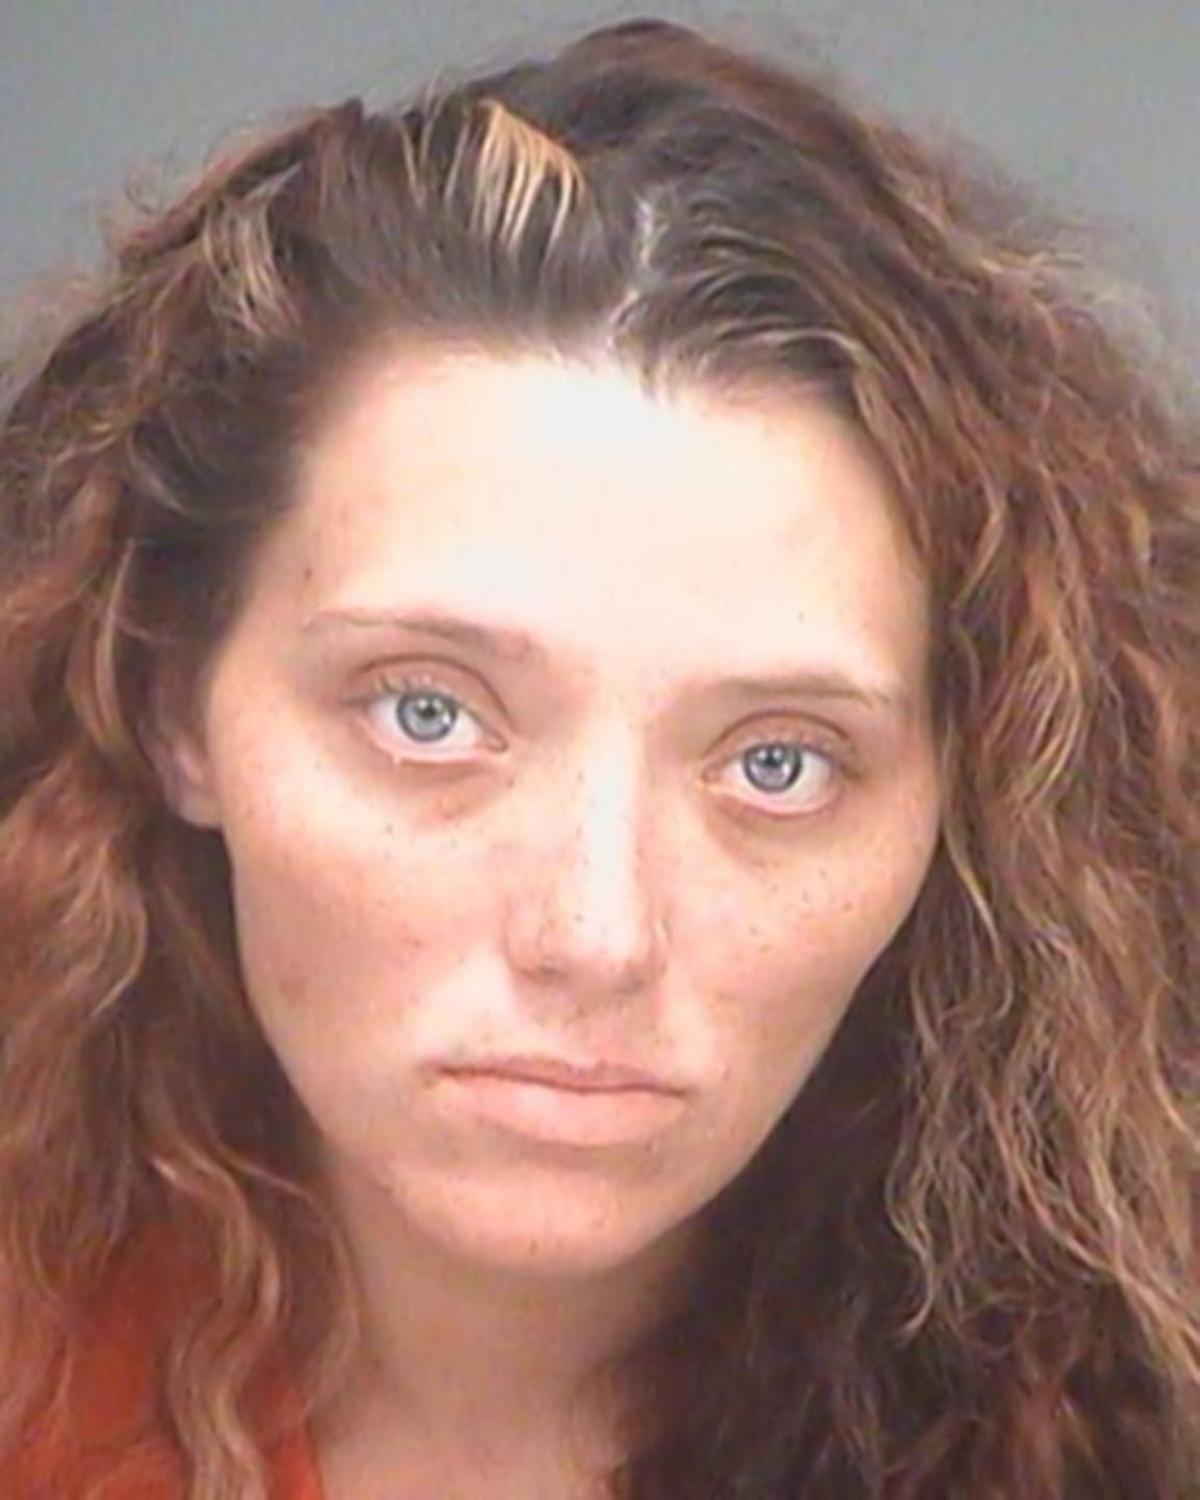 Florida Woman Arrested For Smoking Crack While Giving Birth At Home